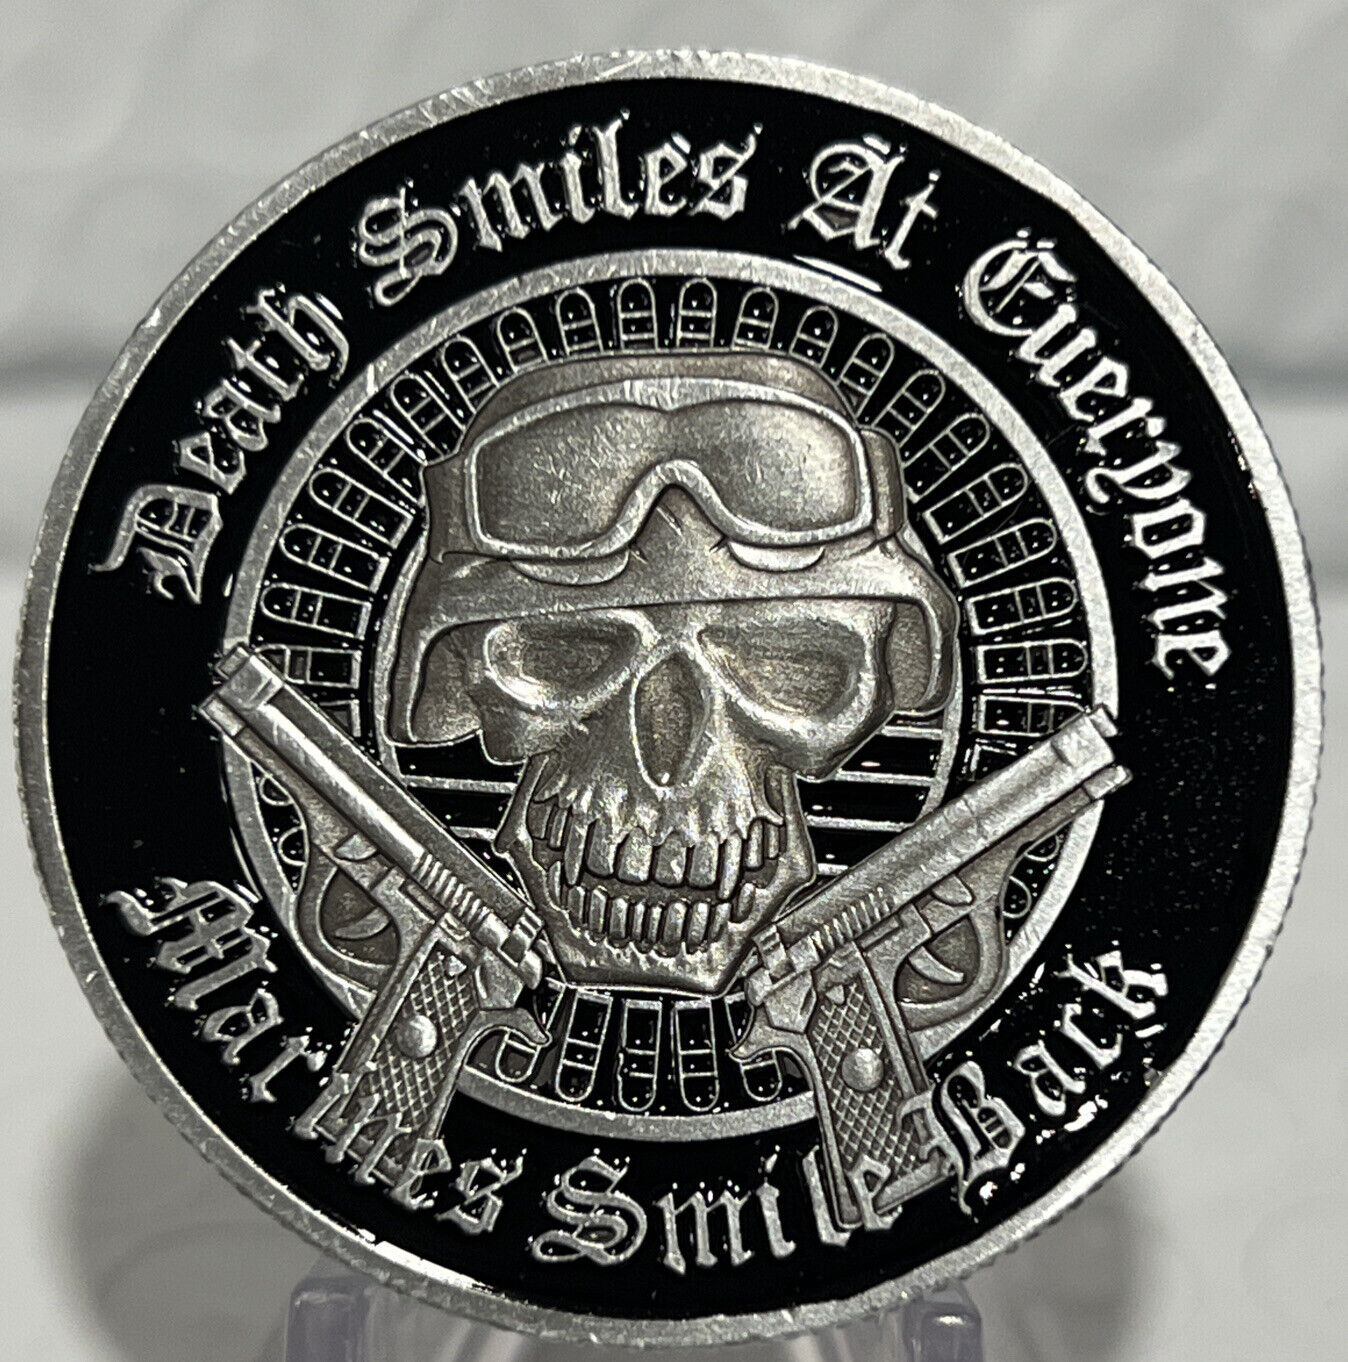 * US Marine Challenge Coin Death Smiles at Everyone / The Marin Smiles Back Coin